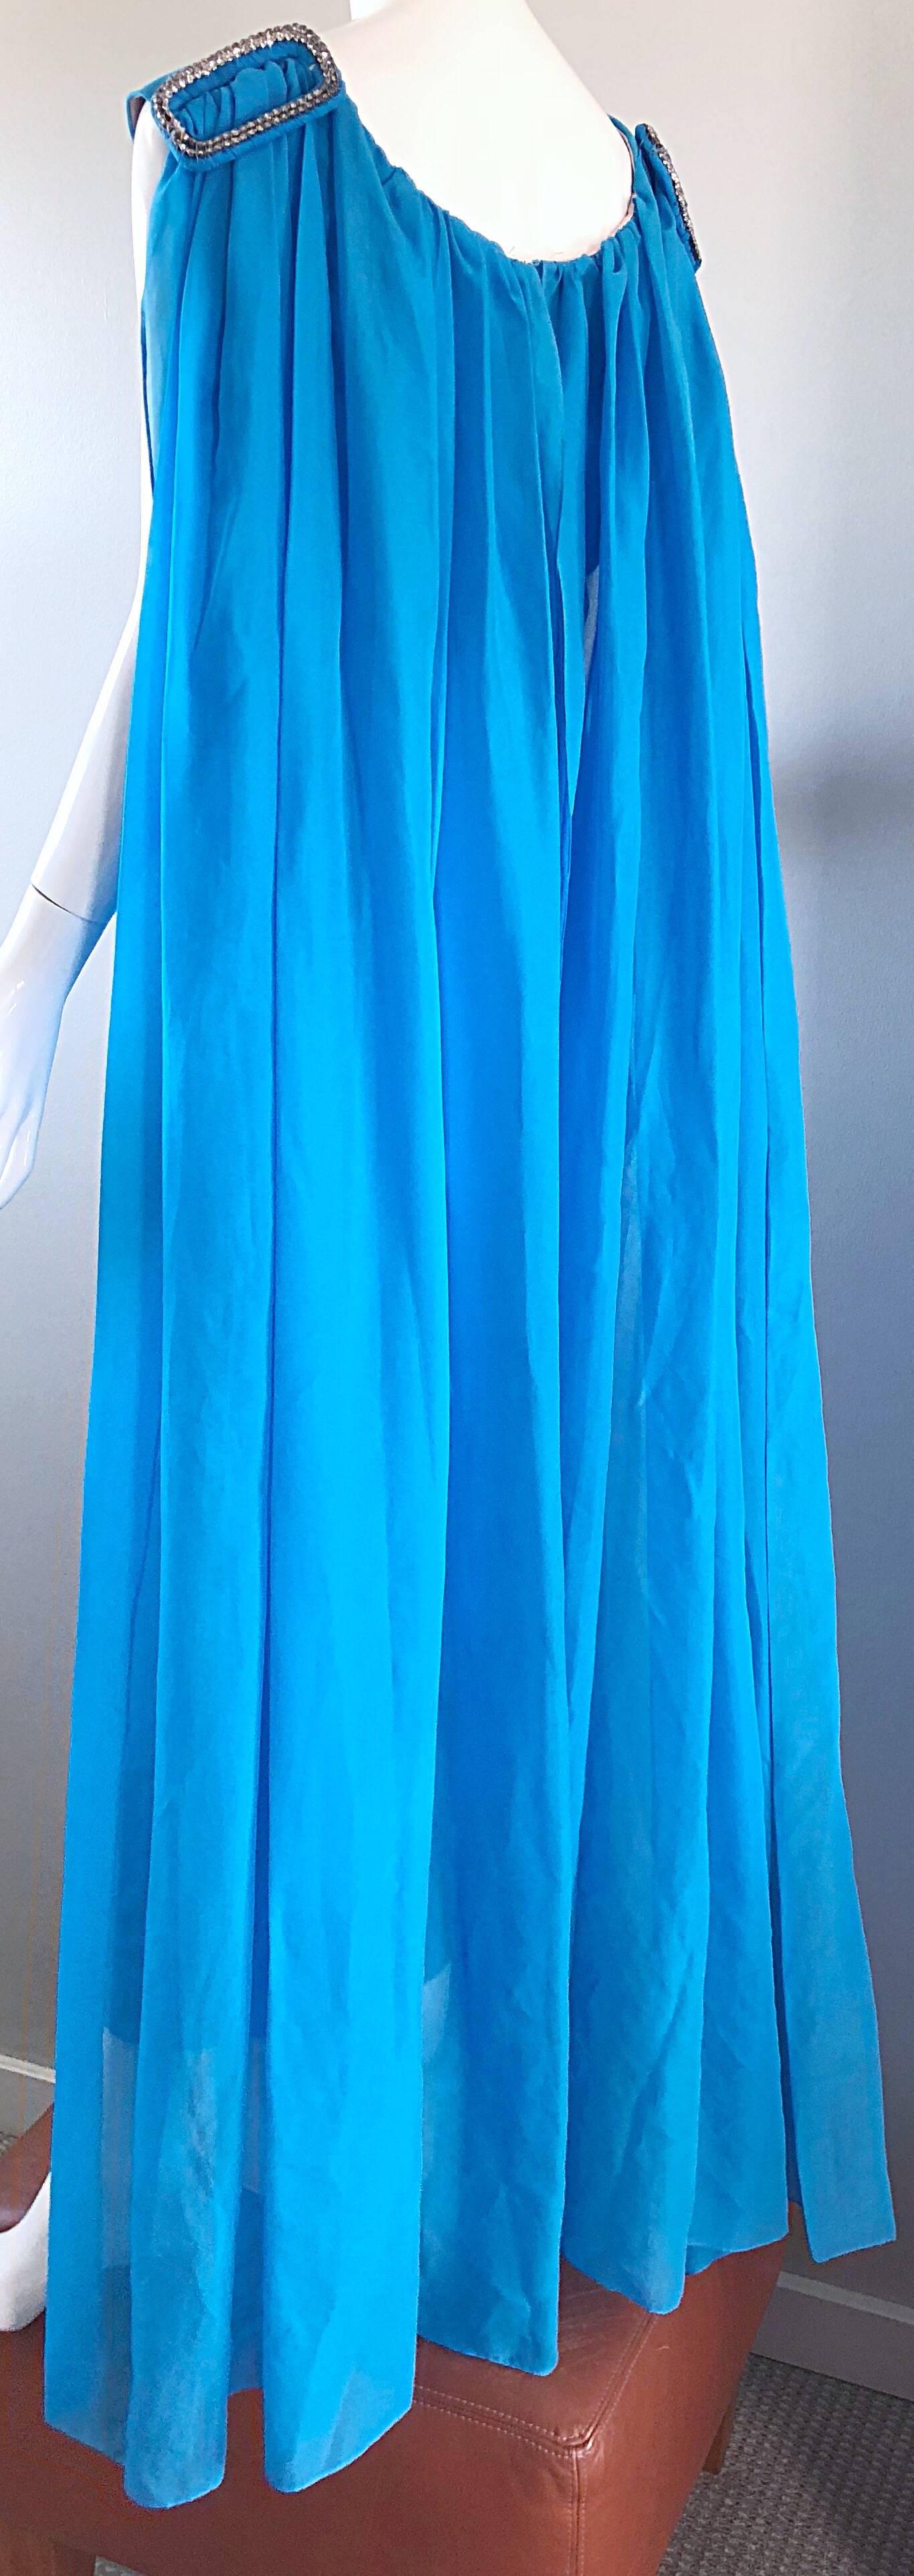 Incredible 1960s Turquoise Blue Chiffon Rhinestone Encrusted Vintage Cape Gown 5